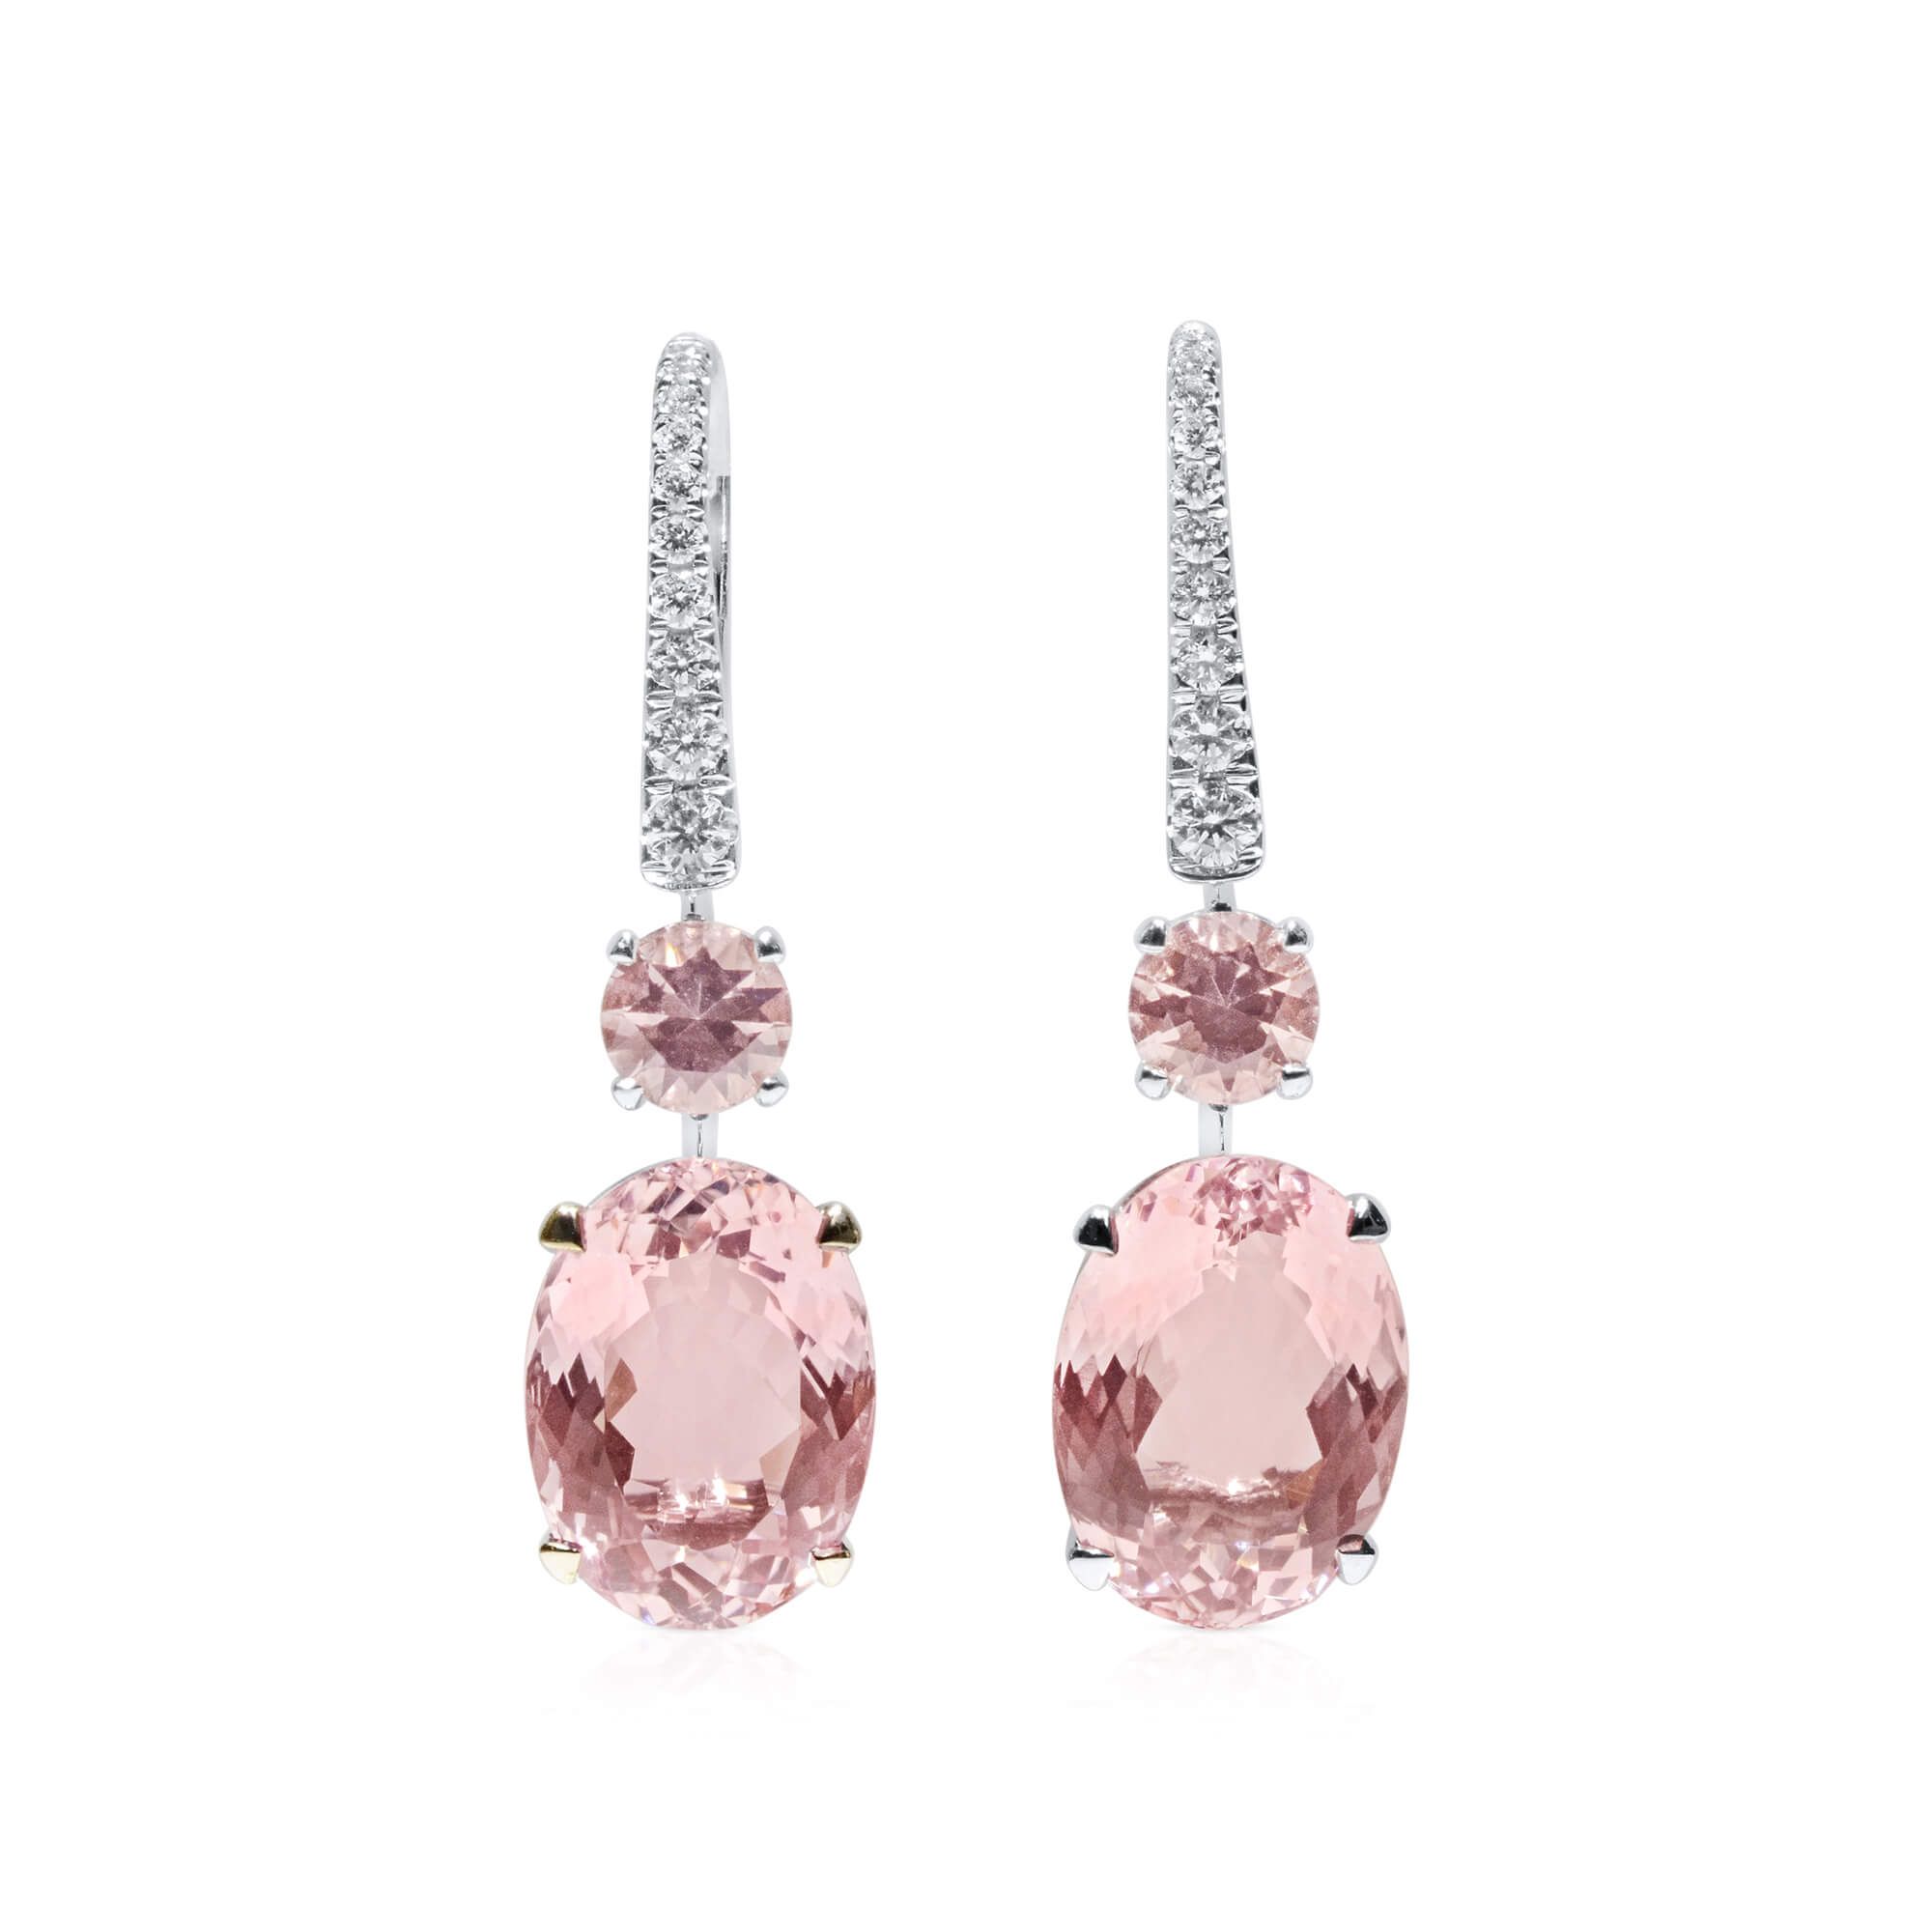 Natural Pink Morganite Earrings, 11.09 Ct. (11.47 Ct. TW), IGL Certified, J37924883IL, Unheated